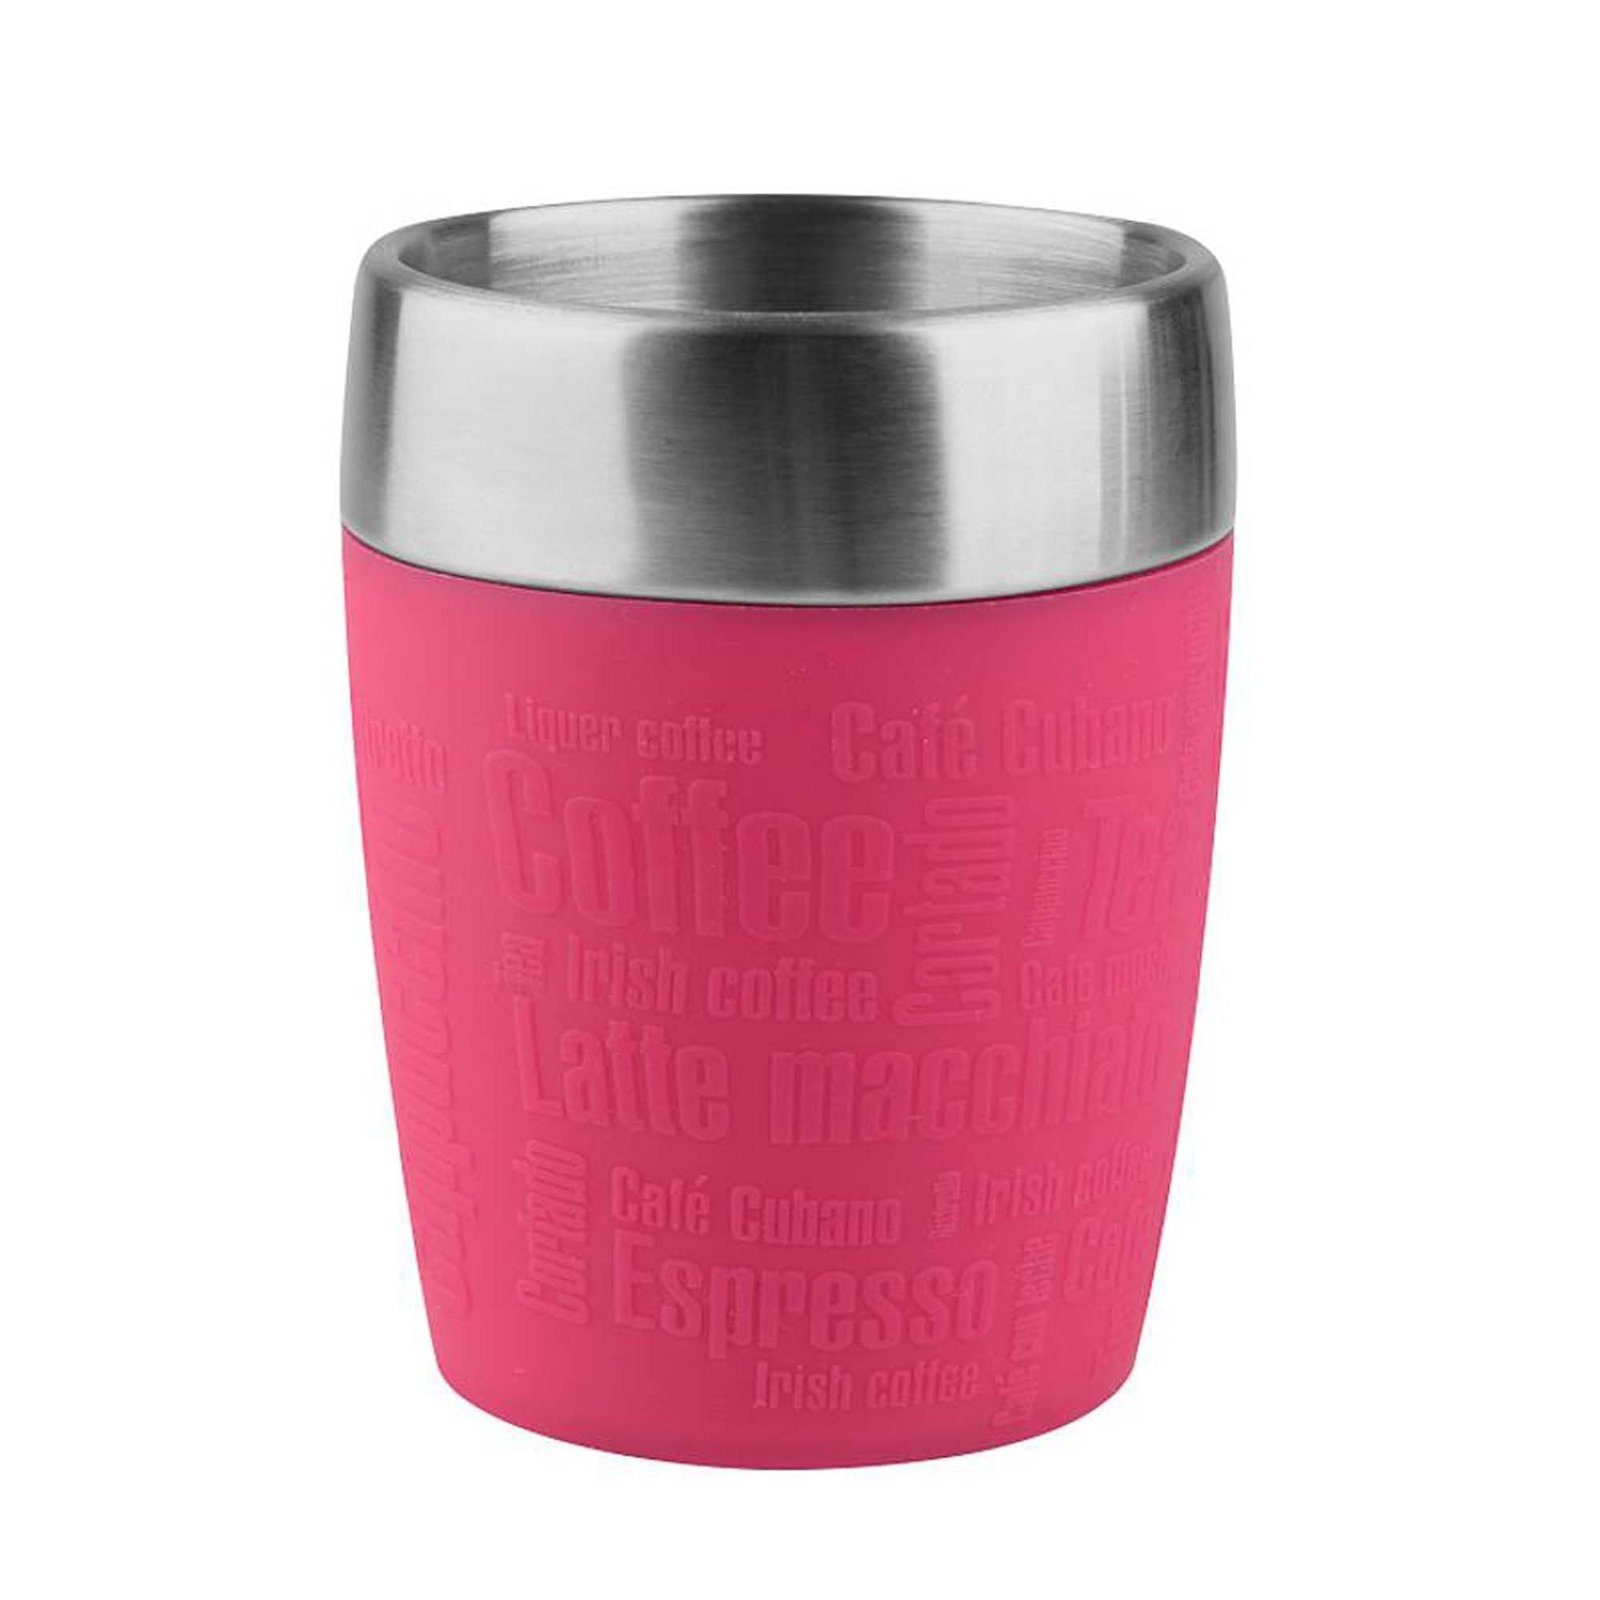 Isobecher Kaffee Emsa Travel ml ToGo Himbeer 200 Thermobecher Isolierflasche Cup,